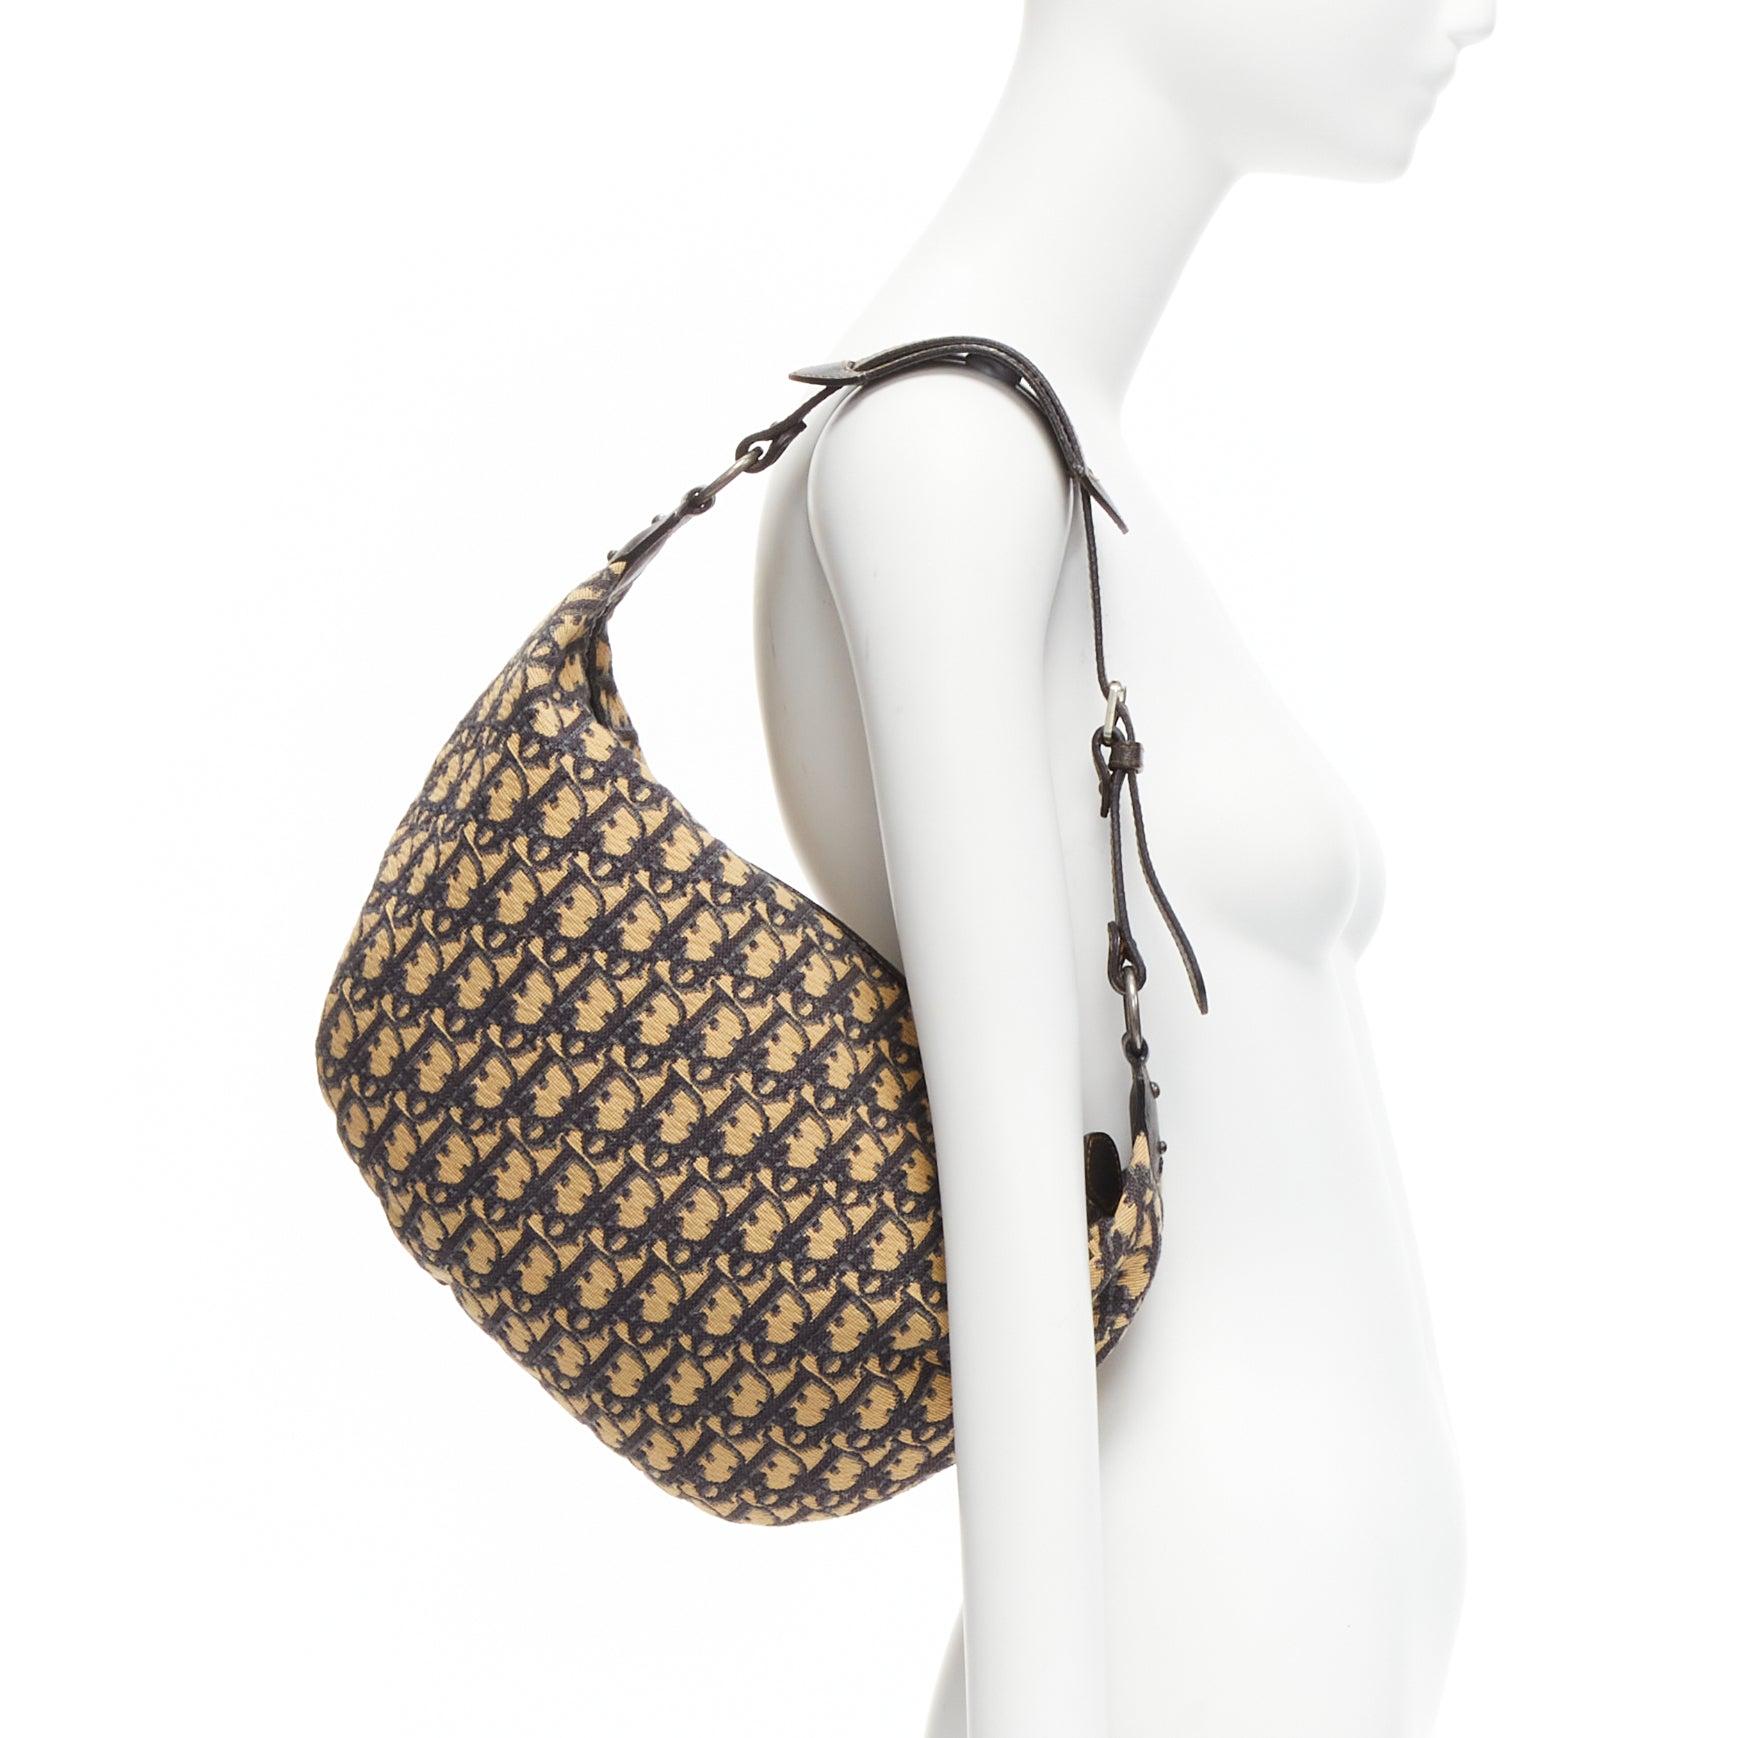 CHRISTIAN DIOR 2006 Vintage Trotter Monogram hobo bag medium
Reference: TGAS/D00702
Brand: Christian Dior
Collection: 2006
Material: Fabric, Leather
Color: Beige, Black
Pattern: Monogram
Closure: Zip
Lining: Navy Fabric
Extra Details: Monogram